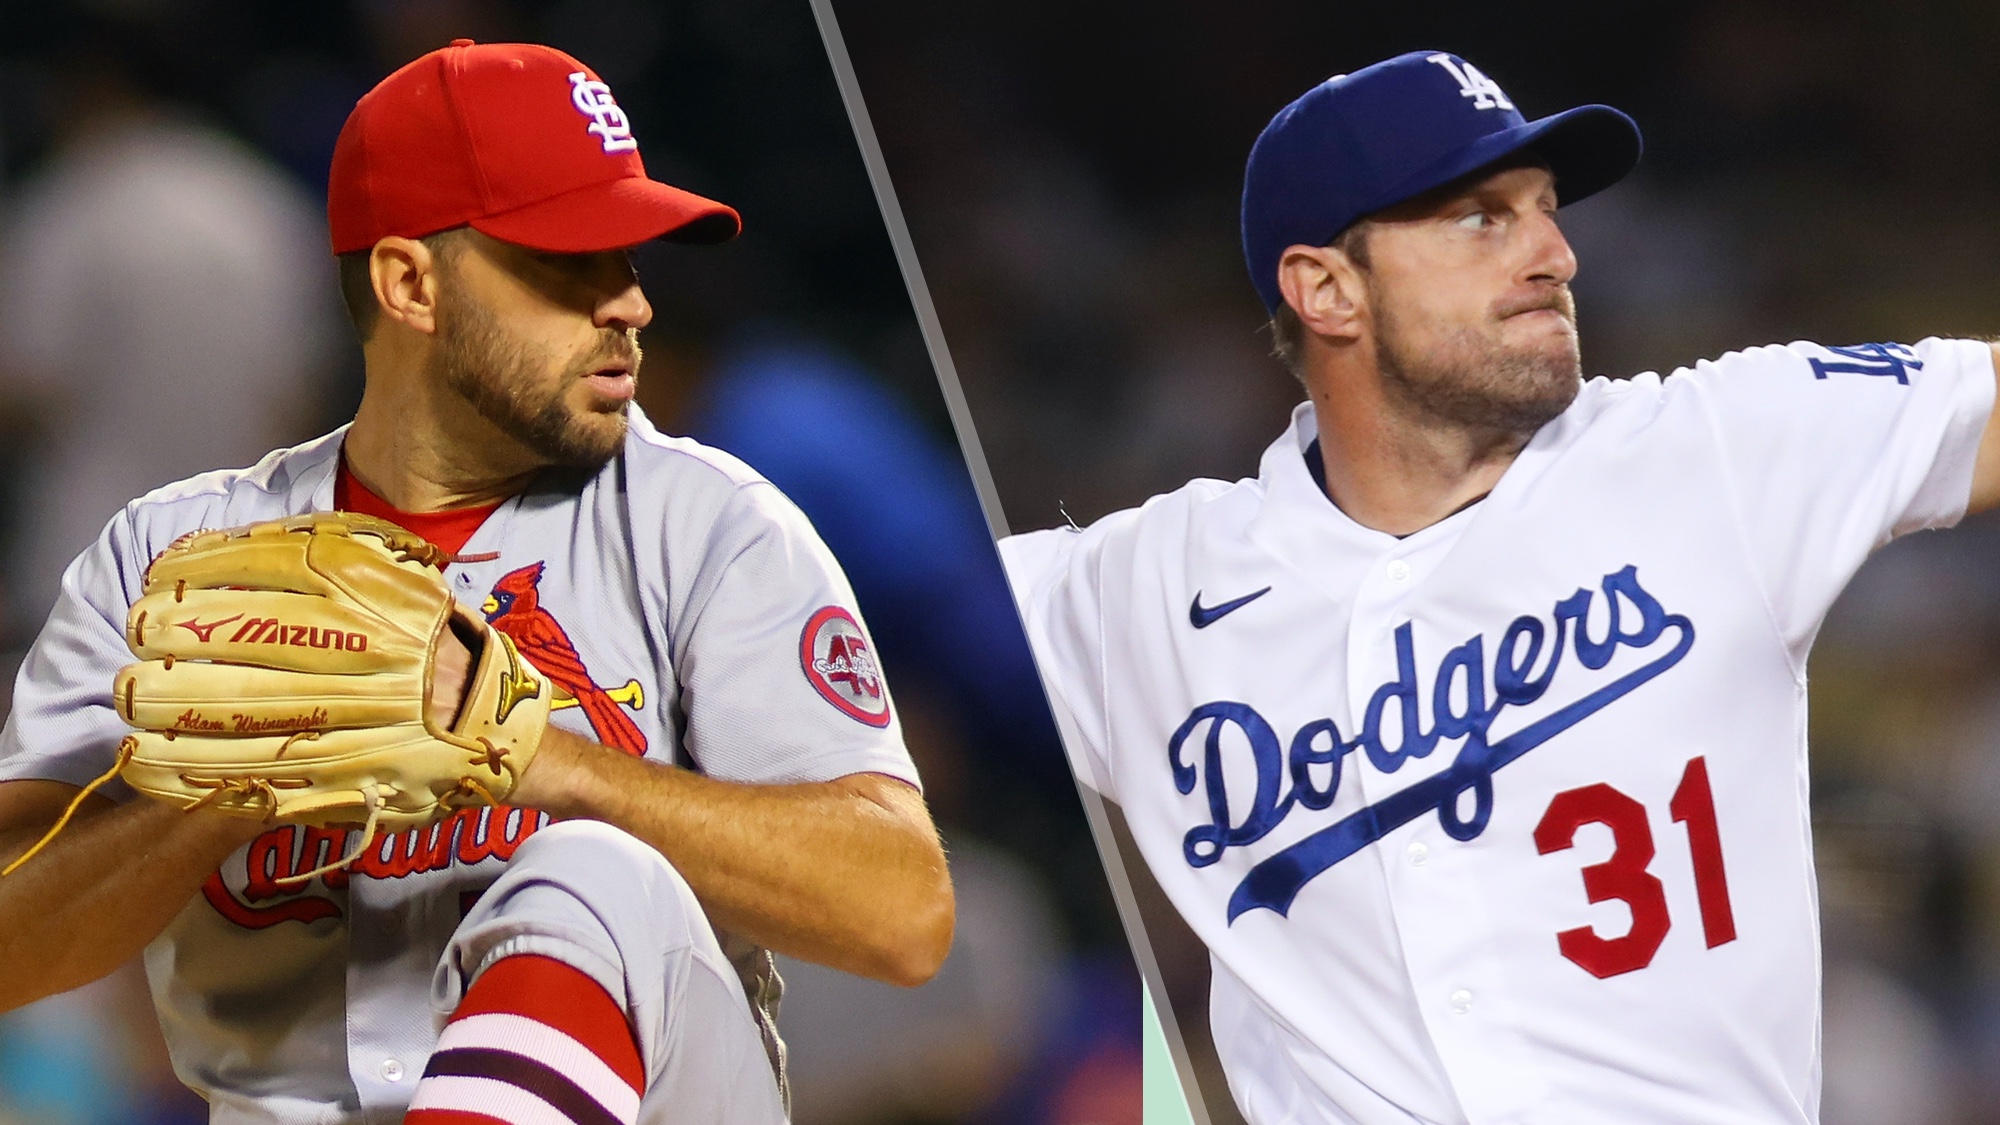 Cardinals vs Dodgers live stream is here: How to watch the MLB Wildcard Playoffs online | Tom's Guide